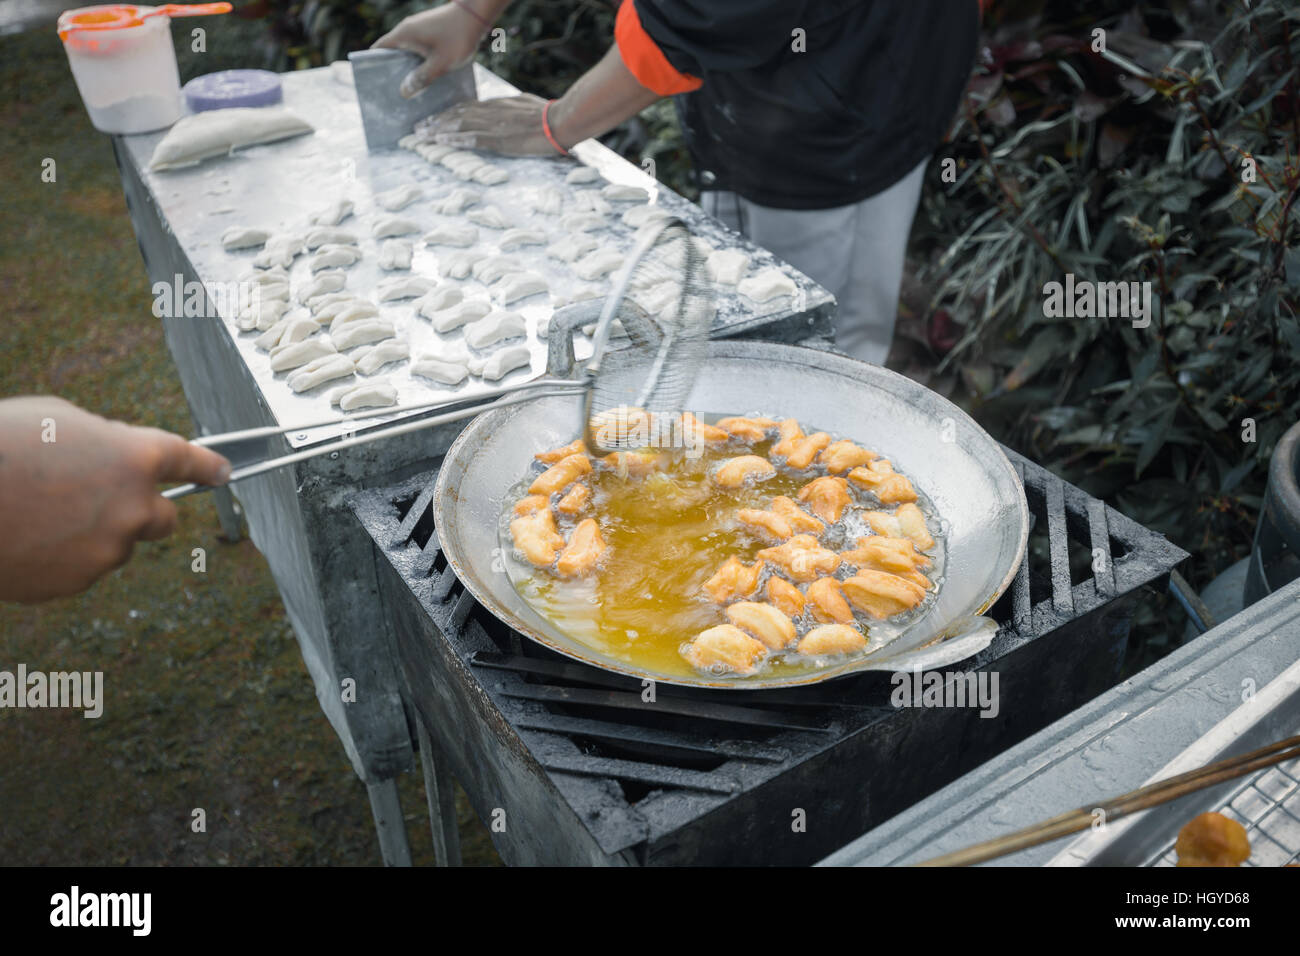 Frying deep fried dough sticks in pan of hot cooking oil. Chef cooking and prepare white raw flour on table beside. Stock Photo